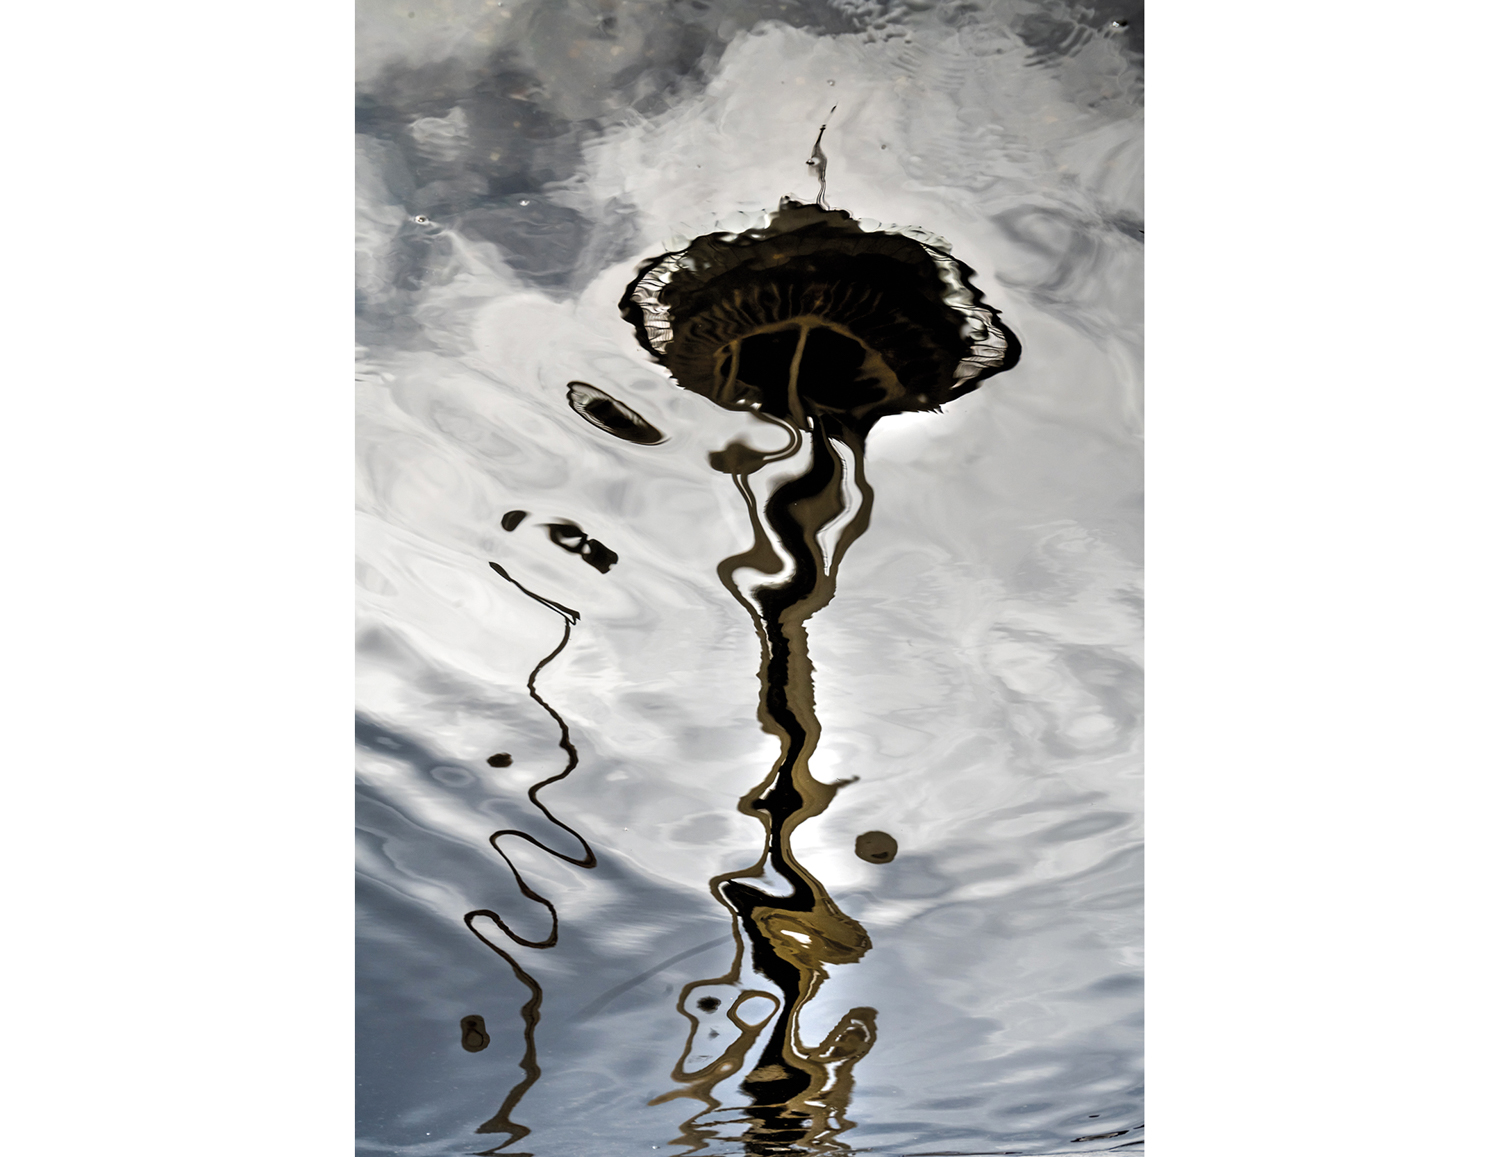 Photograph of the Seattle Space Needle reflected in a puddle by Robin Layton